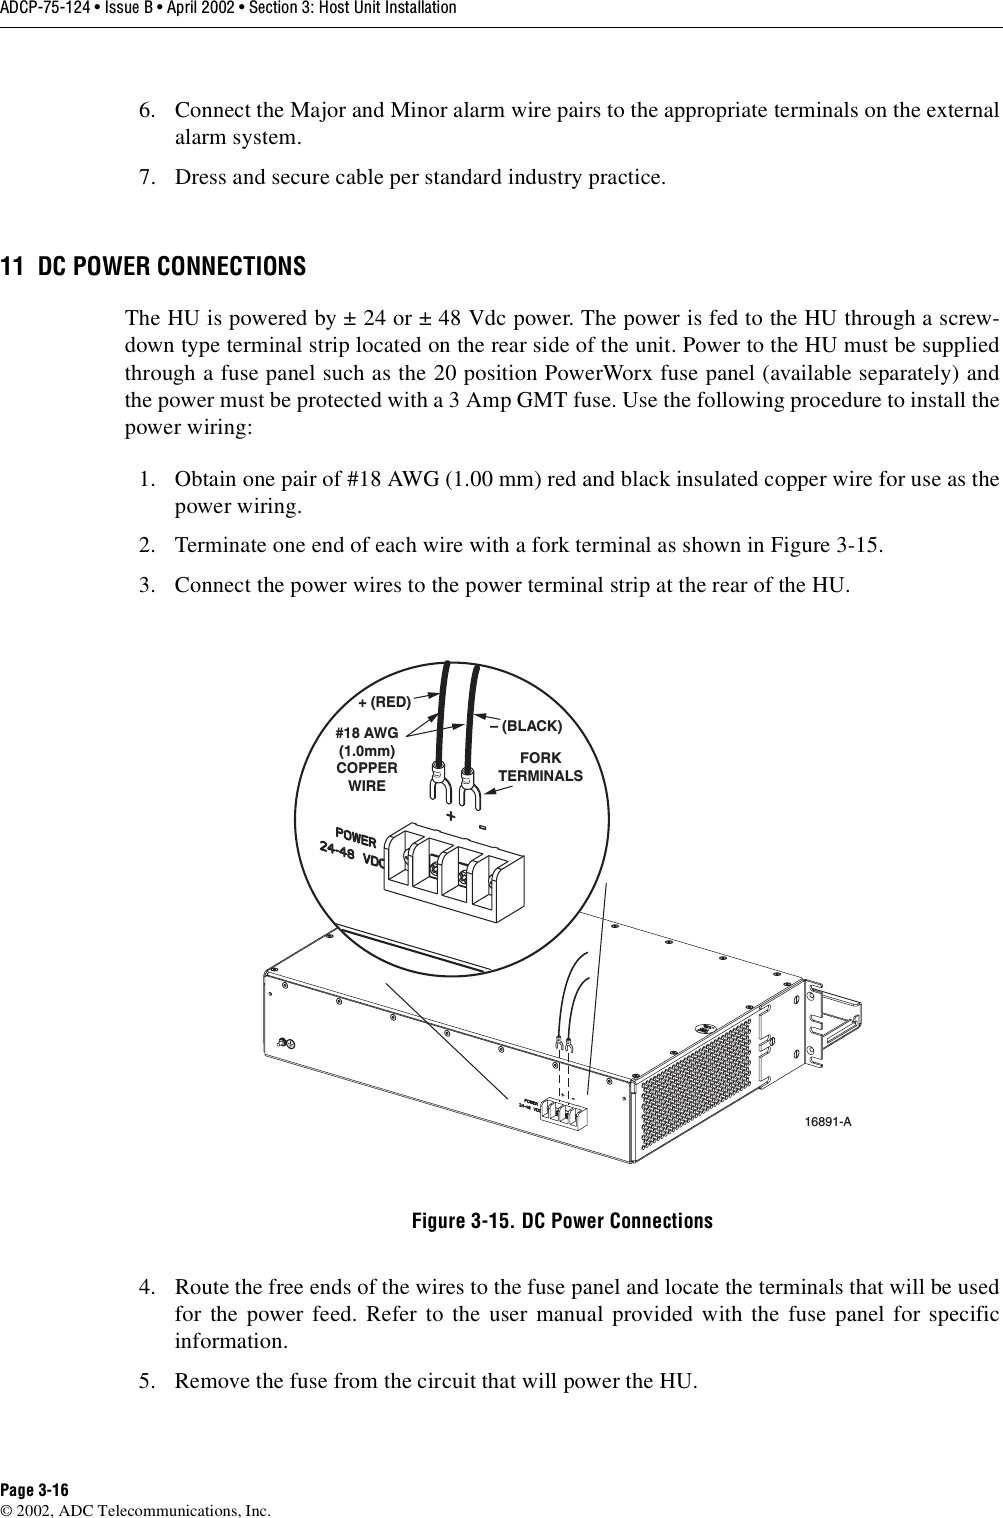 ADCP-75-124 • Issue B • April 2002 • Section 3: Host Unit InstallationPage 3-16©2002, ADC Telecommunications, Inc.6. Connect the Major and Minor alarm wire pairs to the appropriate terminals on the externalalarm system.7. Dress and secure cable per standard industry practice.11 DC POWER CONNECTIONSThe HU is powered by ±24 or ±48 Vdc power. The power is fed to the HU through ascrew-down type terminal strip located on the rear side of the unit. Power to the HU must be suppliedthrough afuse panel such as the 20 position PowerWorx fuse panel (available separately) andthe power must be protected with a 3 Amp GMT fuse. Use the following procedure to install thepower wiring:1. Obtain one pair of #18 AWG (1.00 mm) red and black insulated copper wire for use as thepower wiring.2. Terminate one end of each wire with afork terminal as shown in Figure 3-15.3. Connect the power wires to the power terminal strip at the rear of the HU.Figure 3-15. DC Power Connections4. Route the free ends of the wires to the fuse panel and locate the terminals that will be usedfor the power feed. Refer to the user manual provided with the fuse panel for specificinformation.5. Remove the fuse from the circuit that will power the HU.FORKTERMINALS#18 AWG(1.0mm)COPPERWIRE+ (RED)– (BLACK)16891-A